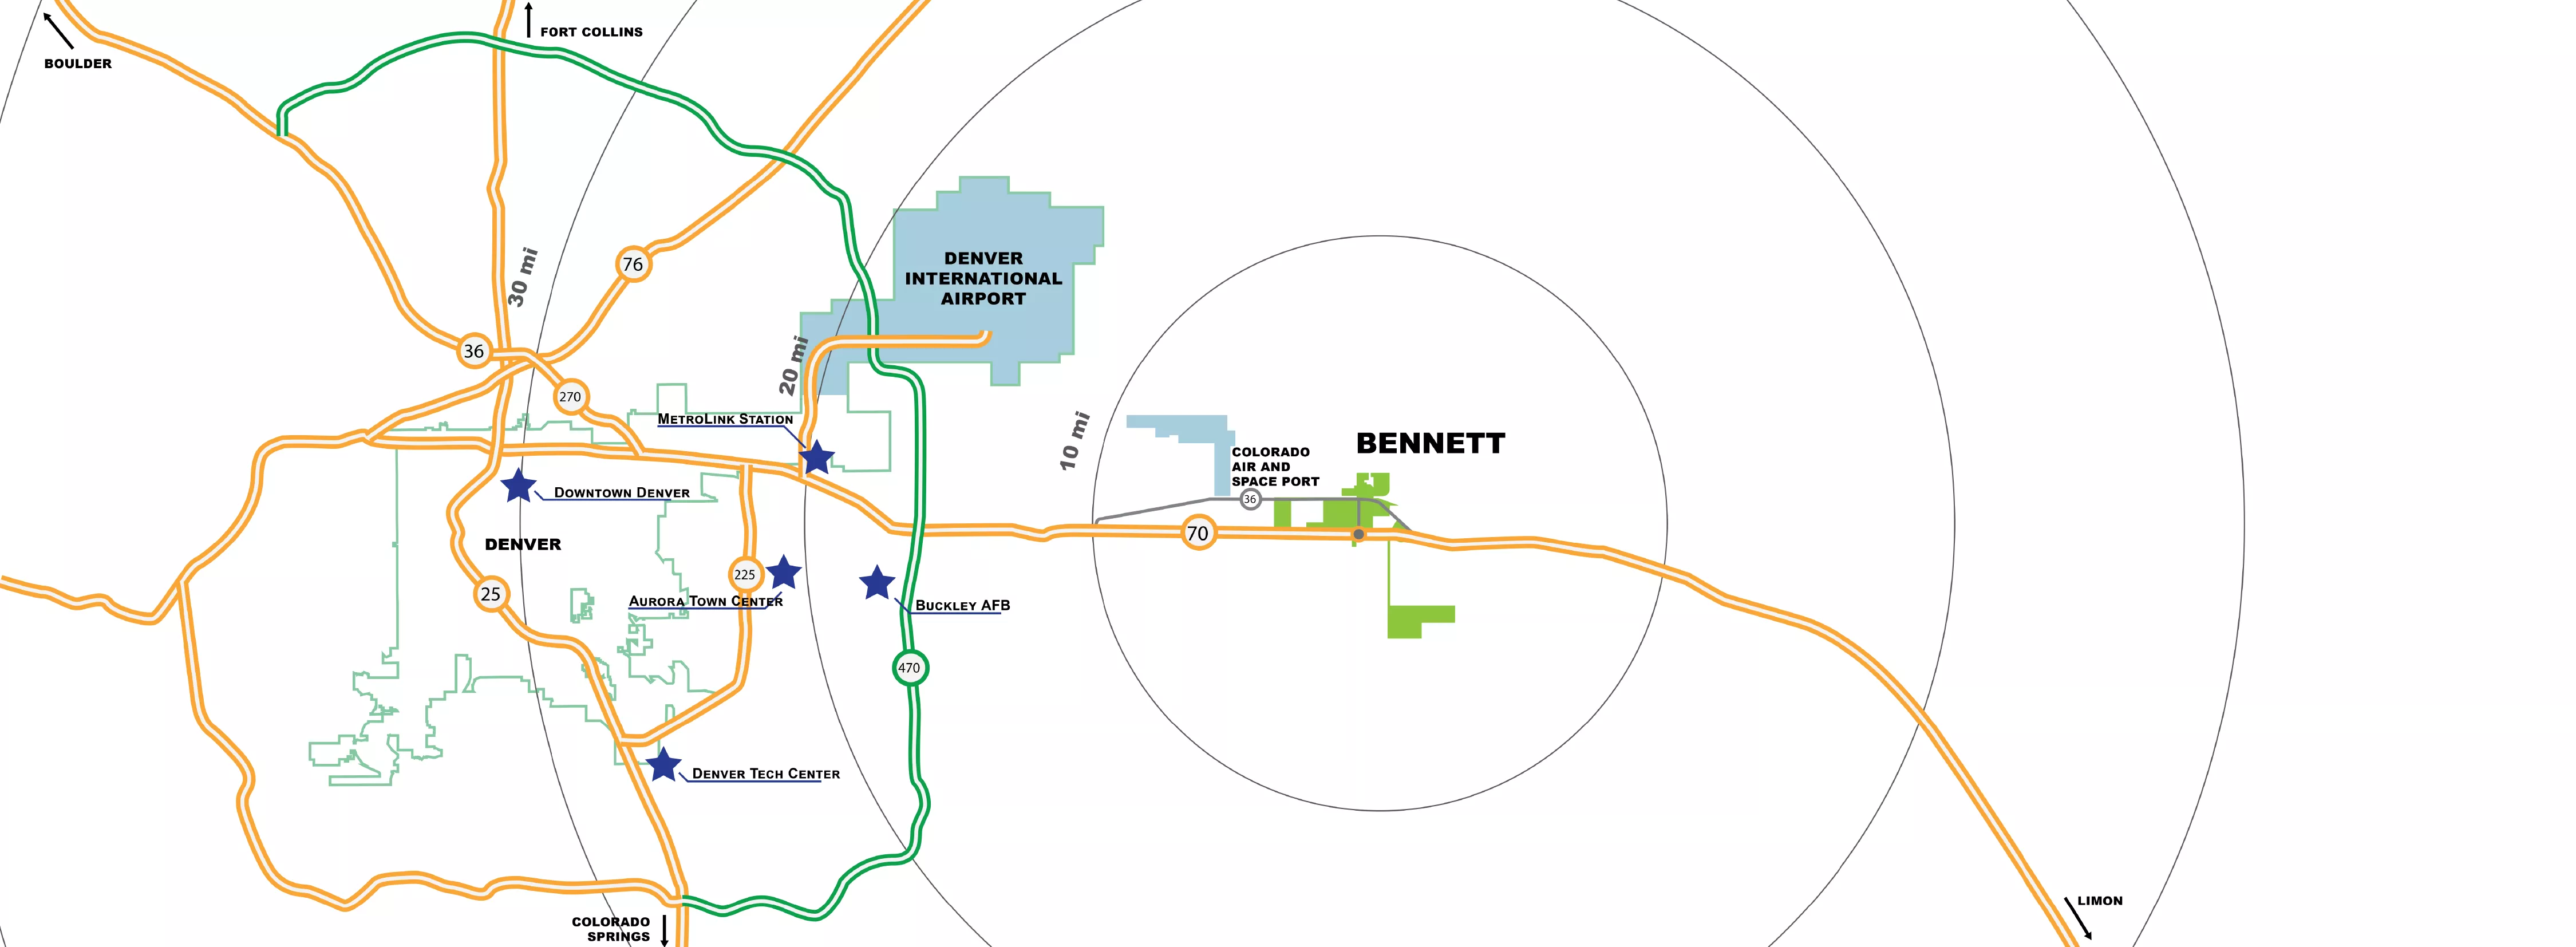 Map of bennett featuring major highway I-70 and featured points Denver International airport, denver, aurora, colorado air and space port. 